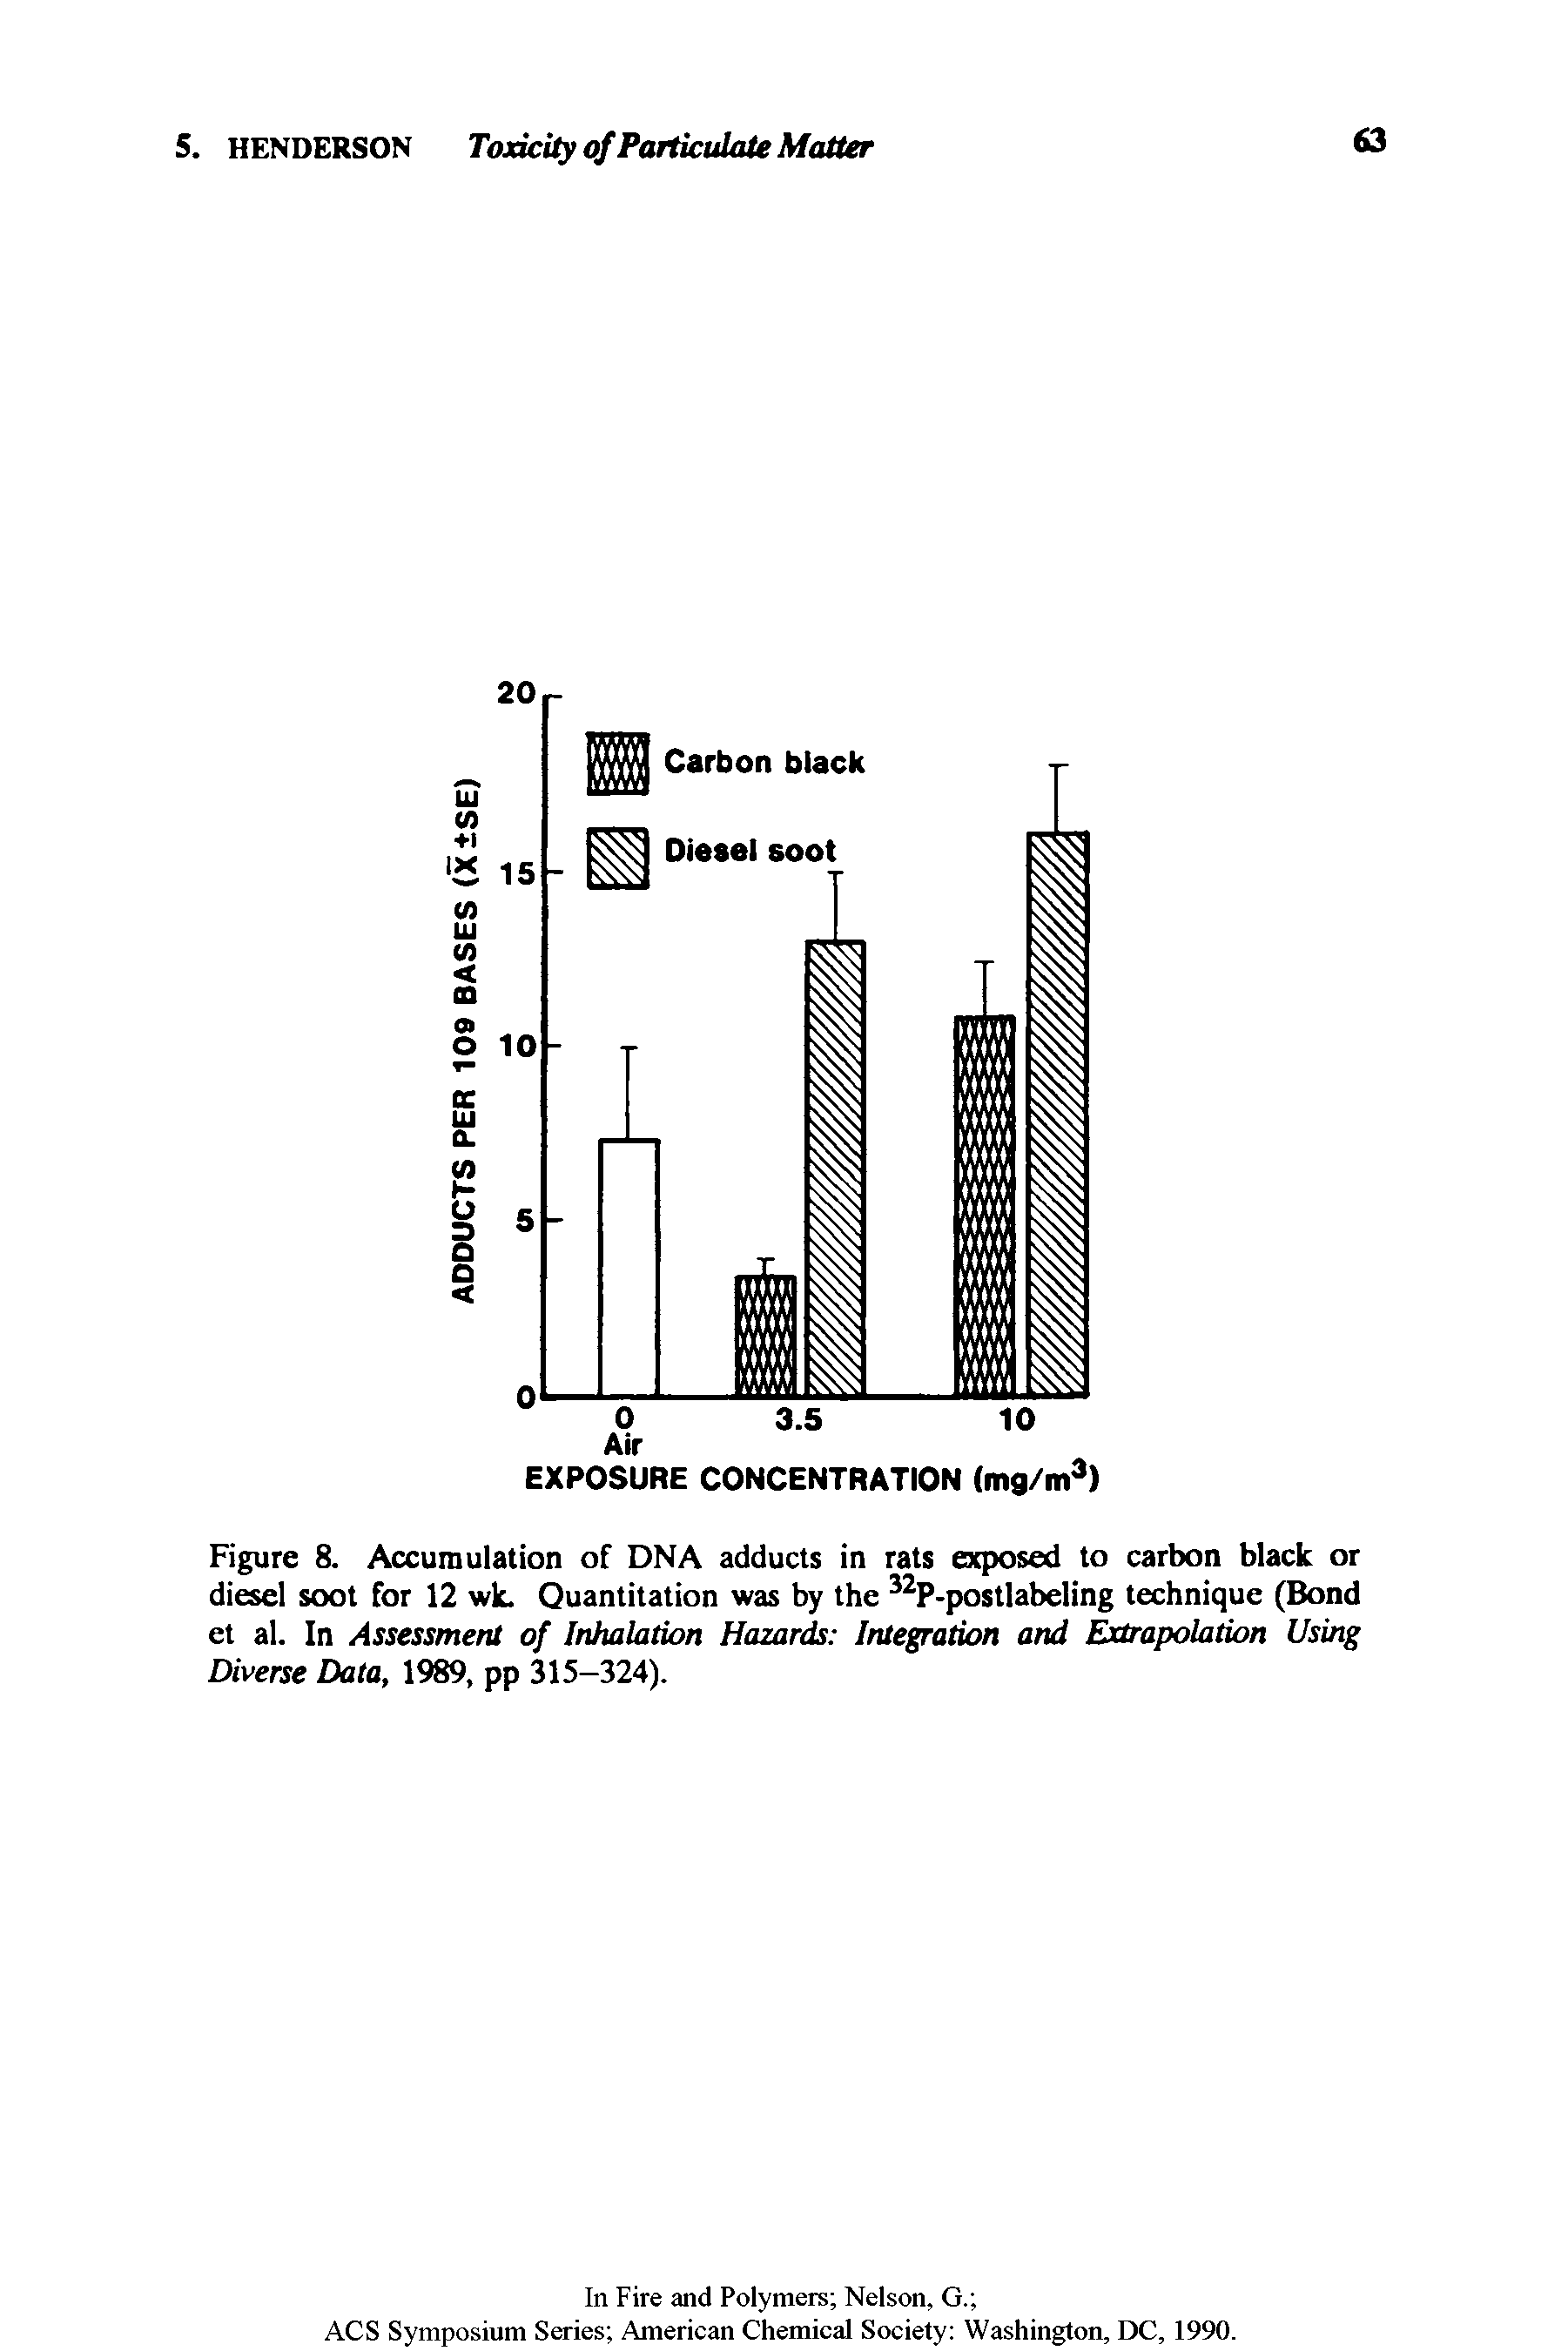 Figure 8. Accumulation of DNA adducts in rats exposed to carbon black or diesel soot for 12 wk. Quantitation was by the 32P-postlabeling technique (Bond et al. In Assessment of Inhalation Hazards Integration and Extrapolation Using Diverse Data, 1989, pp 315-324).